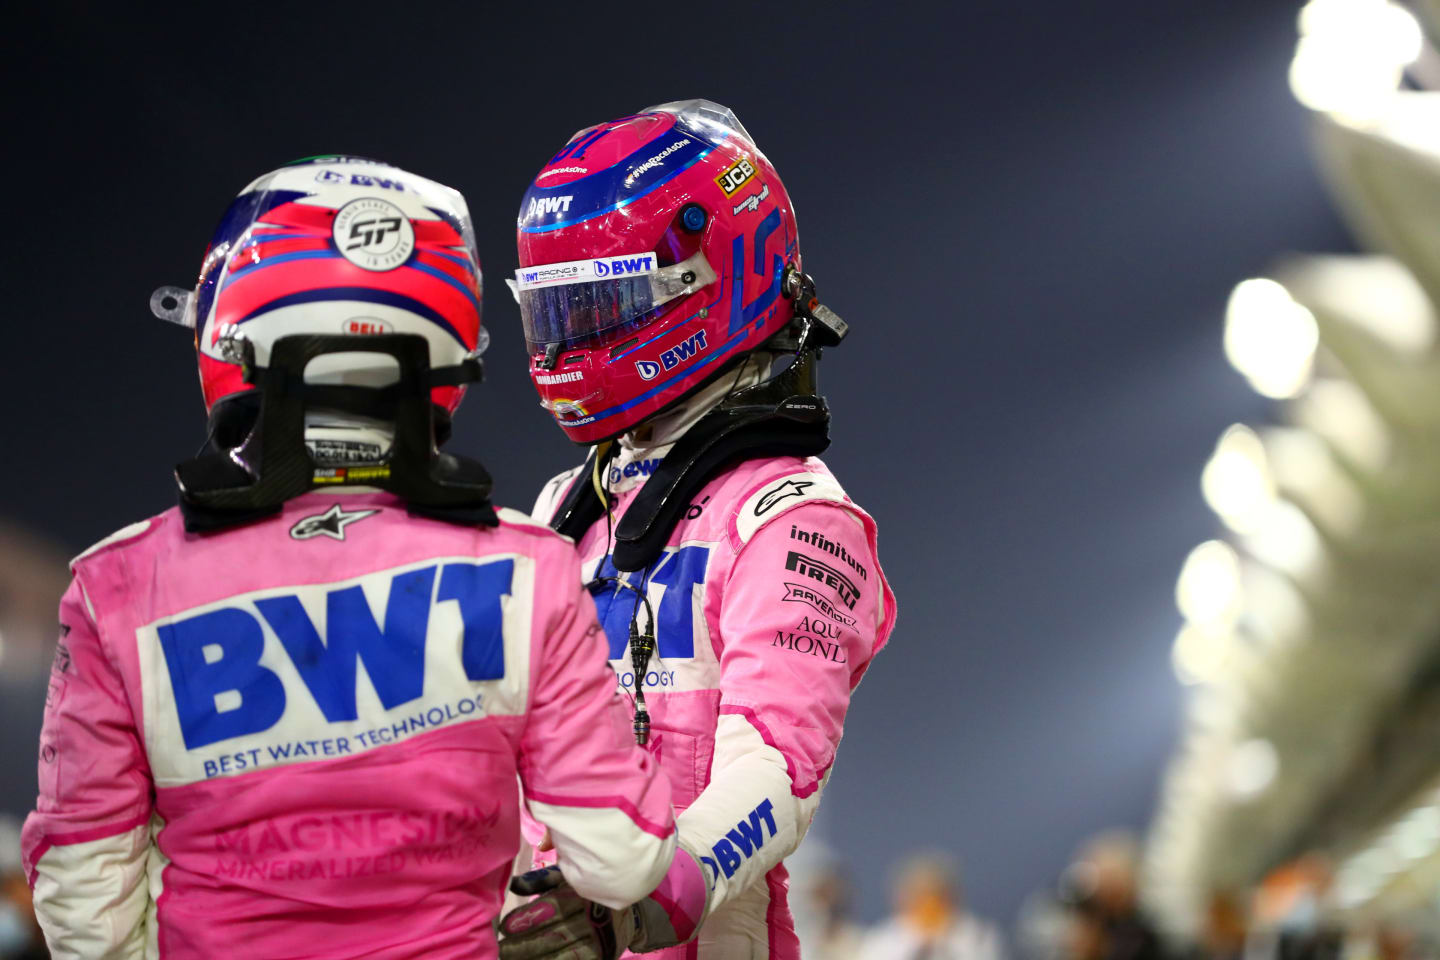 BAHRAIN, BAHRAIN - DECEMBER 06: Race winner Sergio Perez of Mexico and Racing Point and third placed Lance Stroll of Canada and Racing Point celebrate in parc ferme during the F1 Grand Prix of Sakhir at Bahrain International Circuit on December 06, 2020 in Bahrain, Bahrain. (Photo by Dan Istitene - Formula 1/Formula 1 via Getty Images)